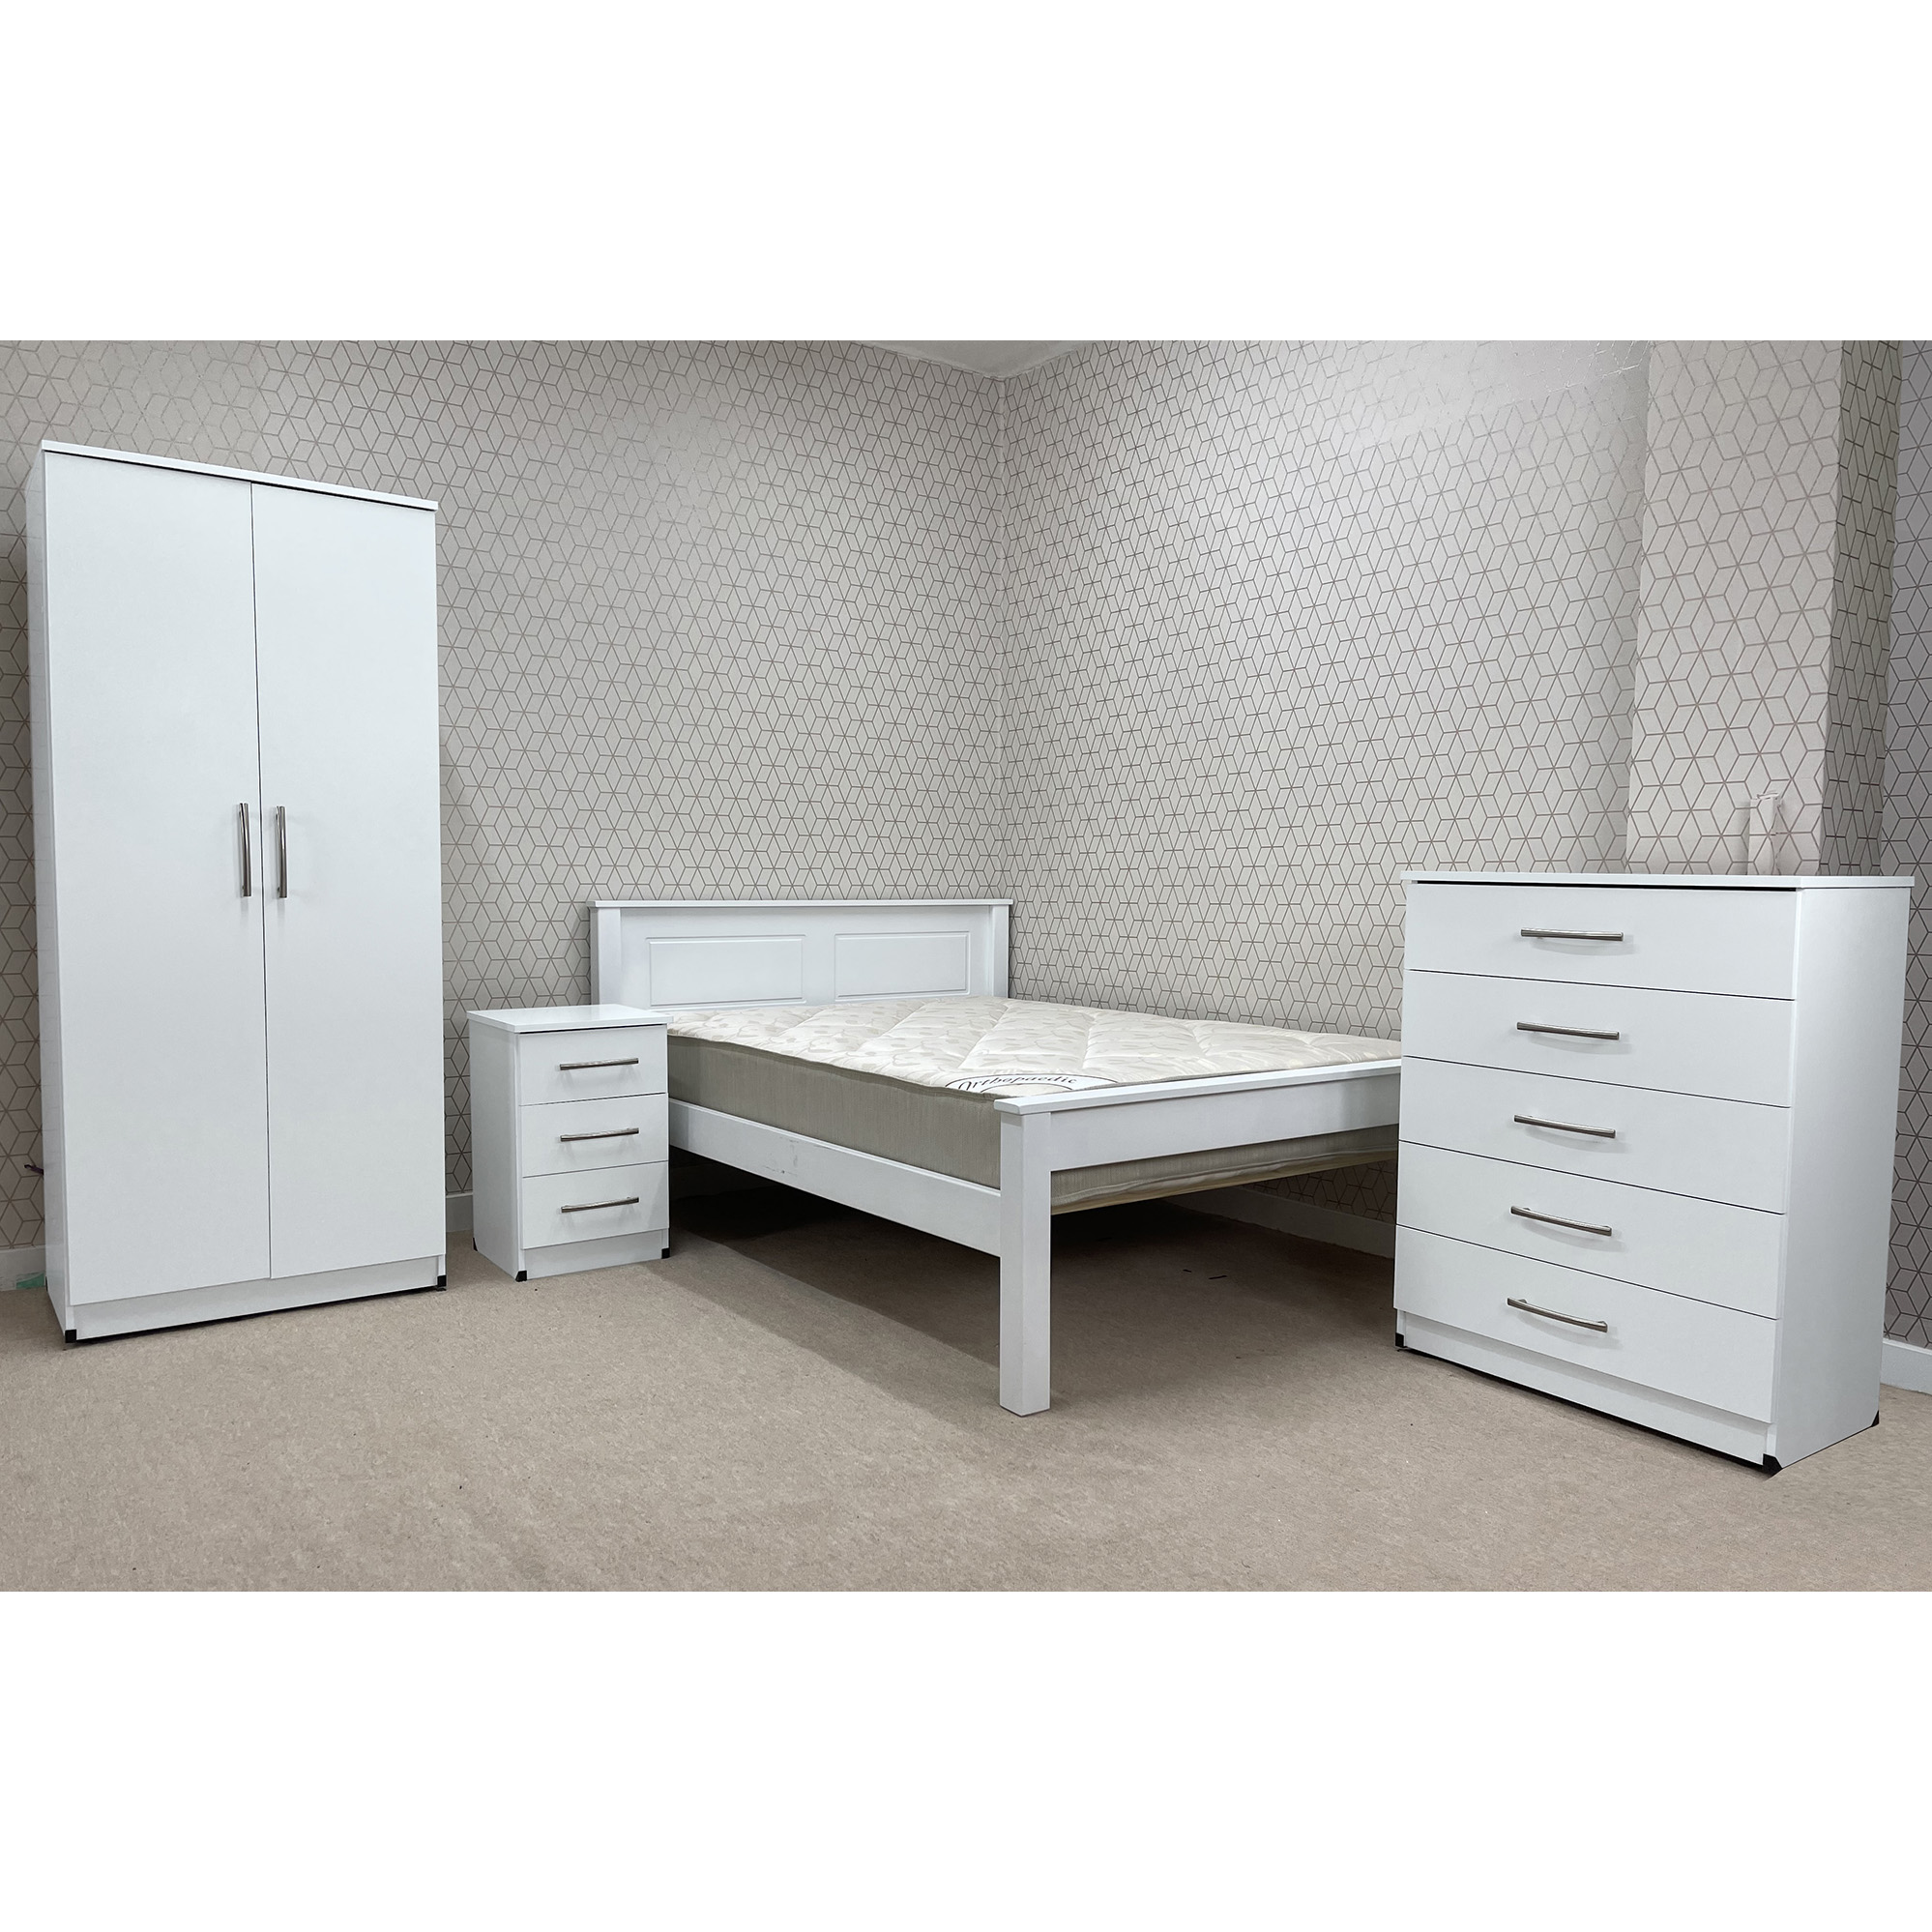 hmo furniture package landlord furniture package 2d